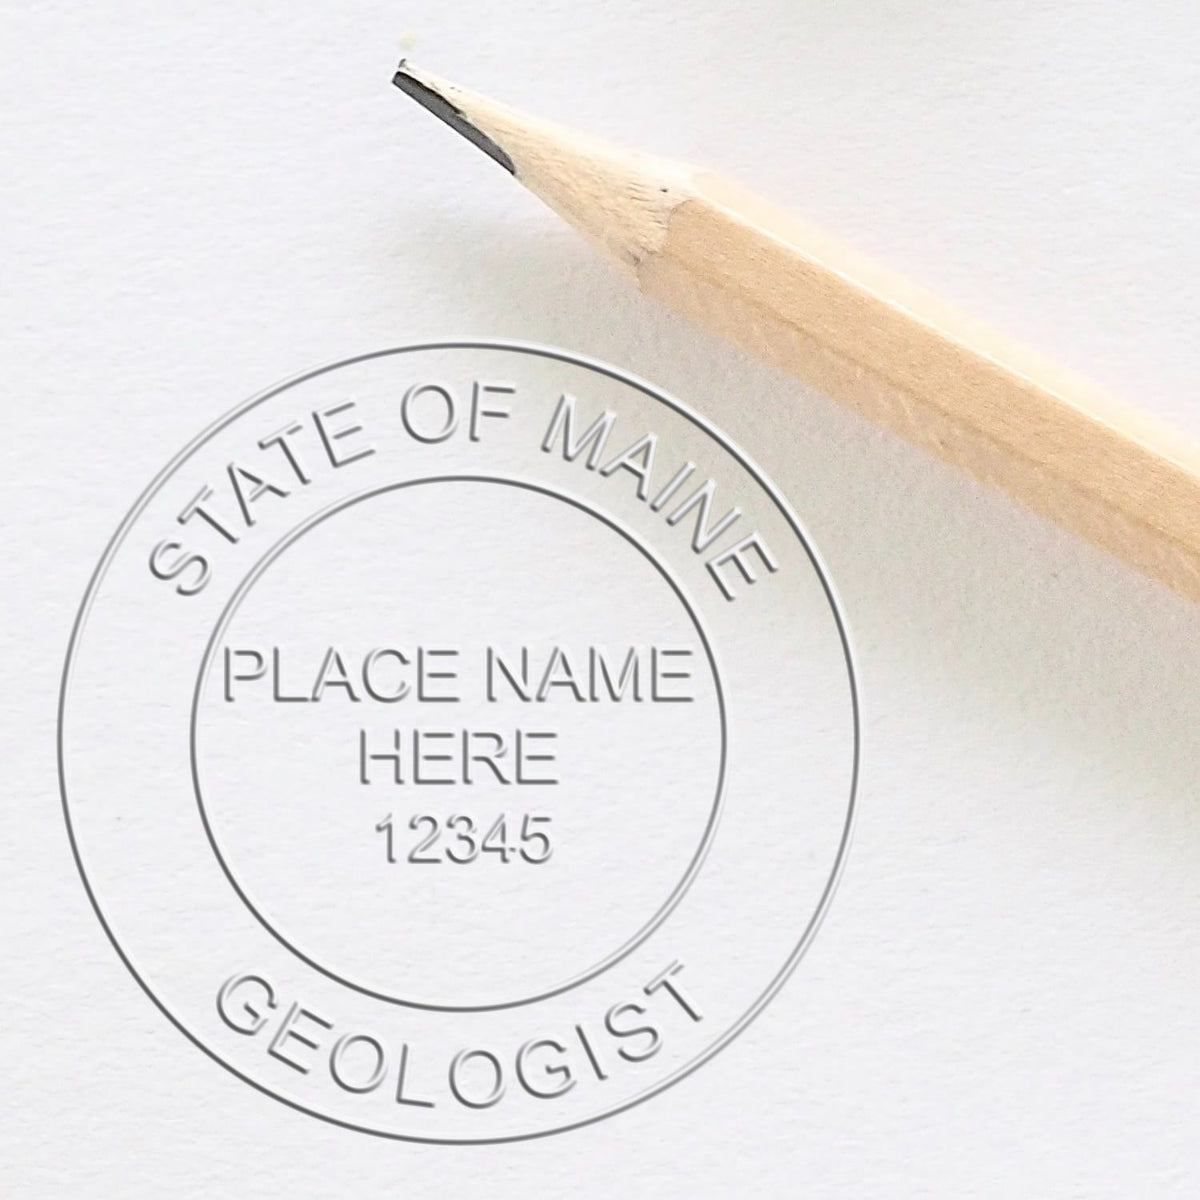 A stamped imprint of the State of Maine Extended Long Reach Geologist Seal in this stylish lifestyle photo, setting the tone for a unique and personalized product.